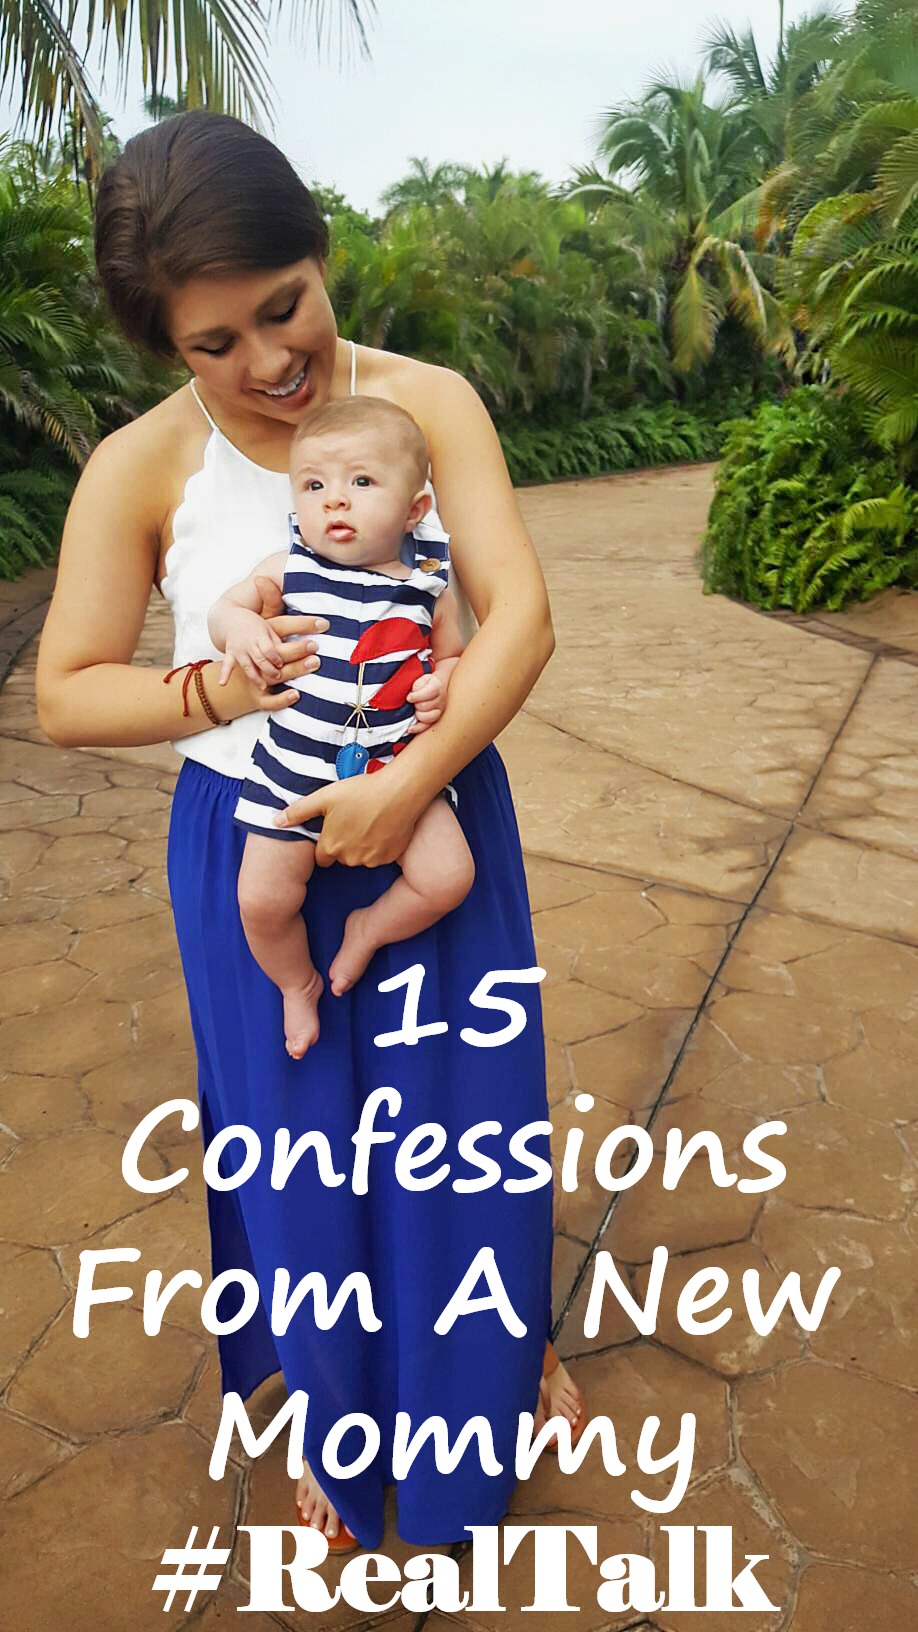 15 confessions from a new mommy.jpg